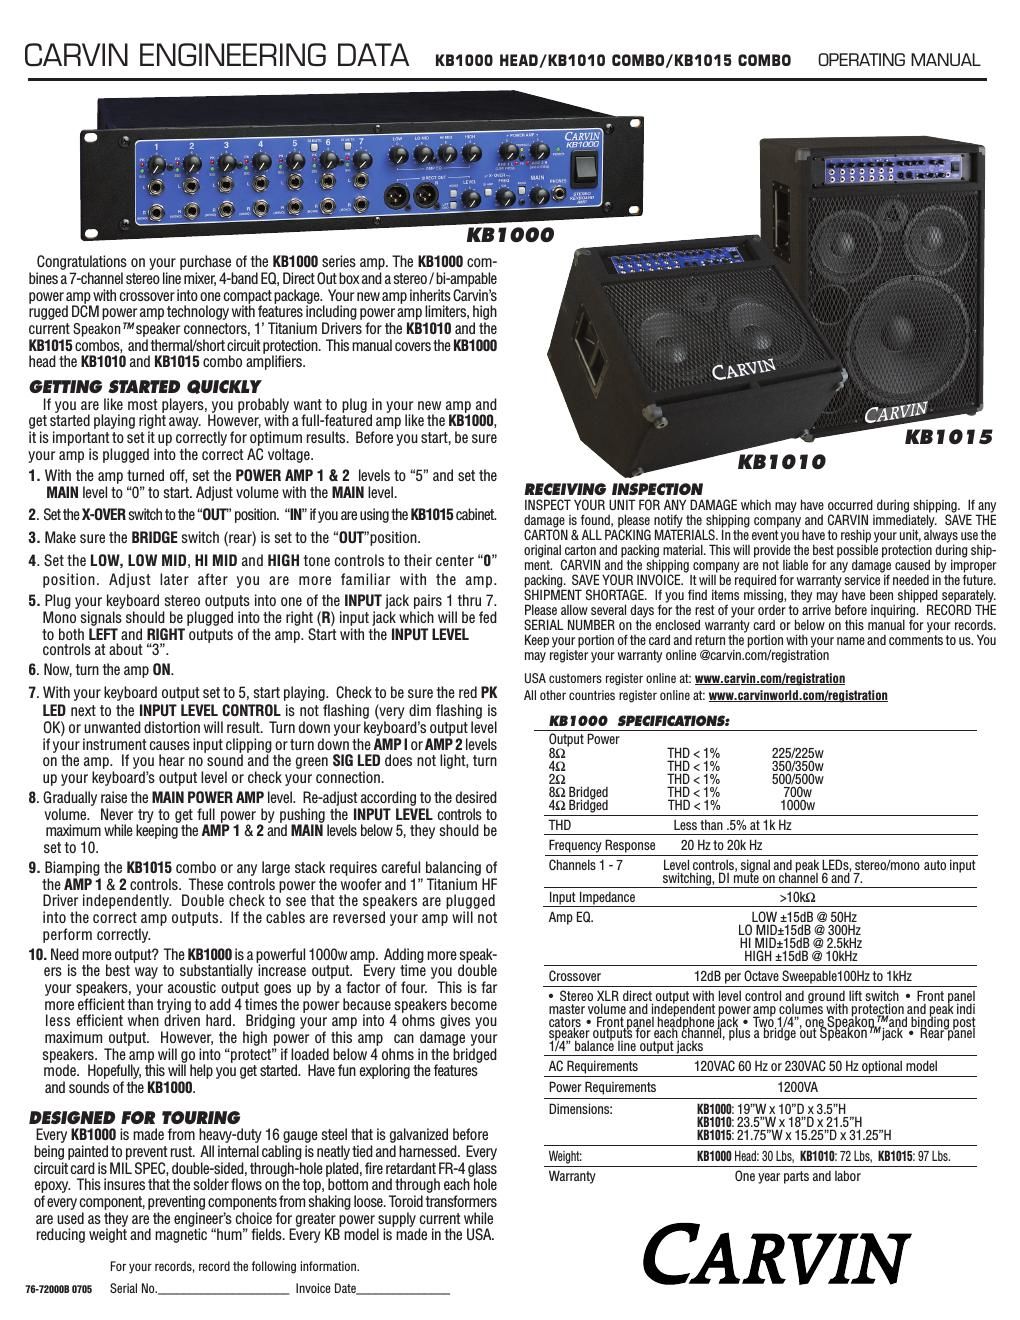 carvin kb 1010 owners manual